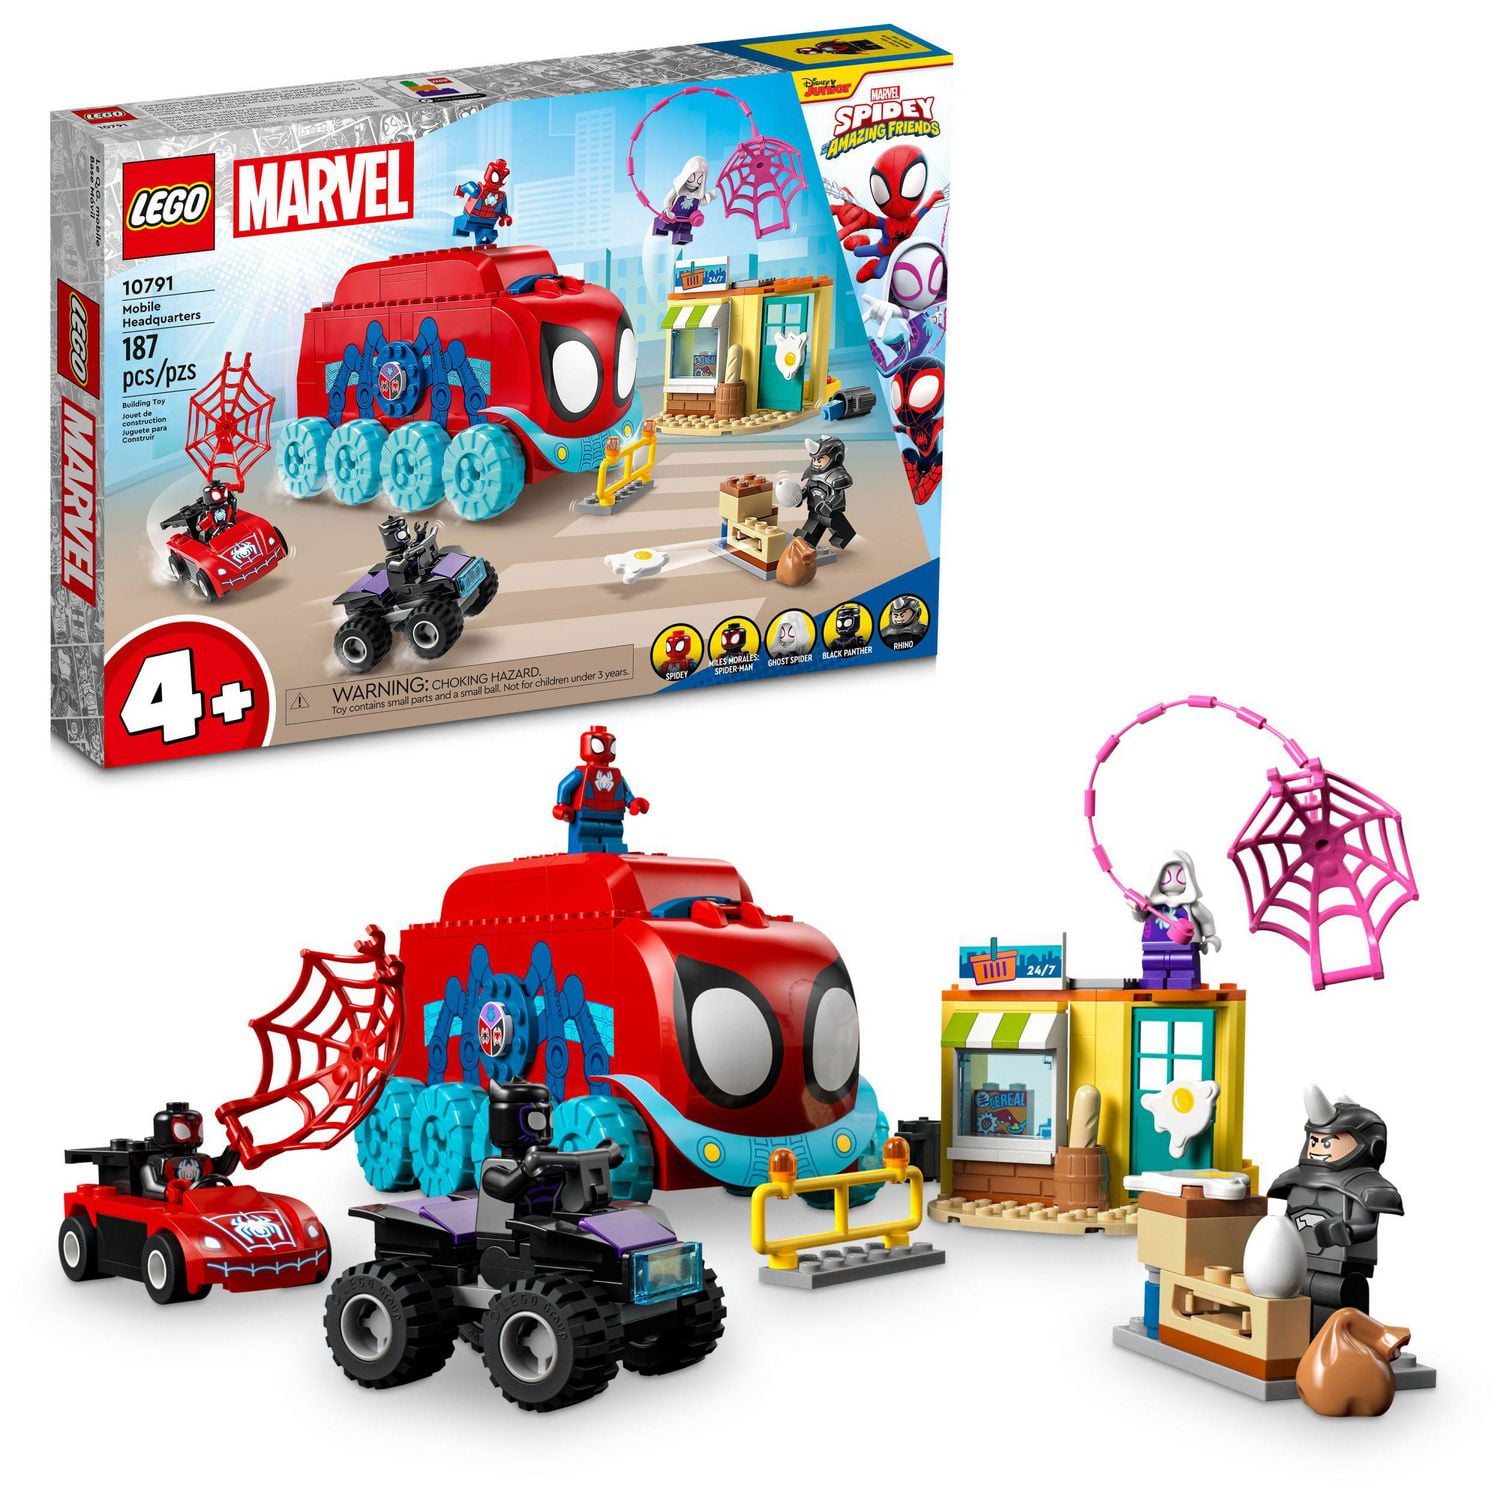 LEGO Marvel Team Spidey's Mobile Headquarters 10791 Building Set -  Featuring Miles Morales and Black Panther Minifigures, Spidey and His  Amazing Friends Series, For Boys, Girls, and Kids Ages 4+, Includes 187